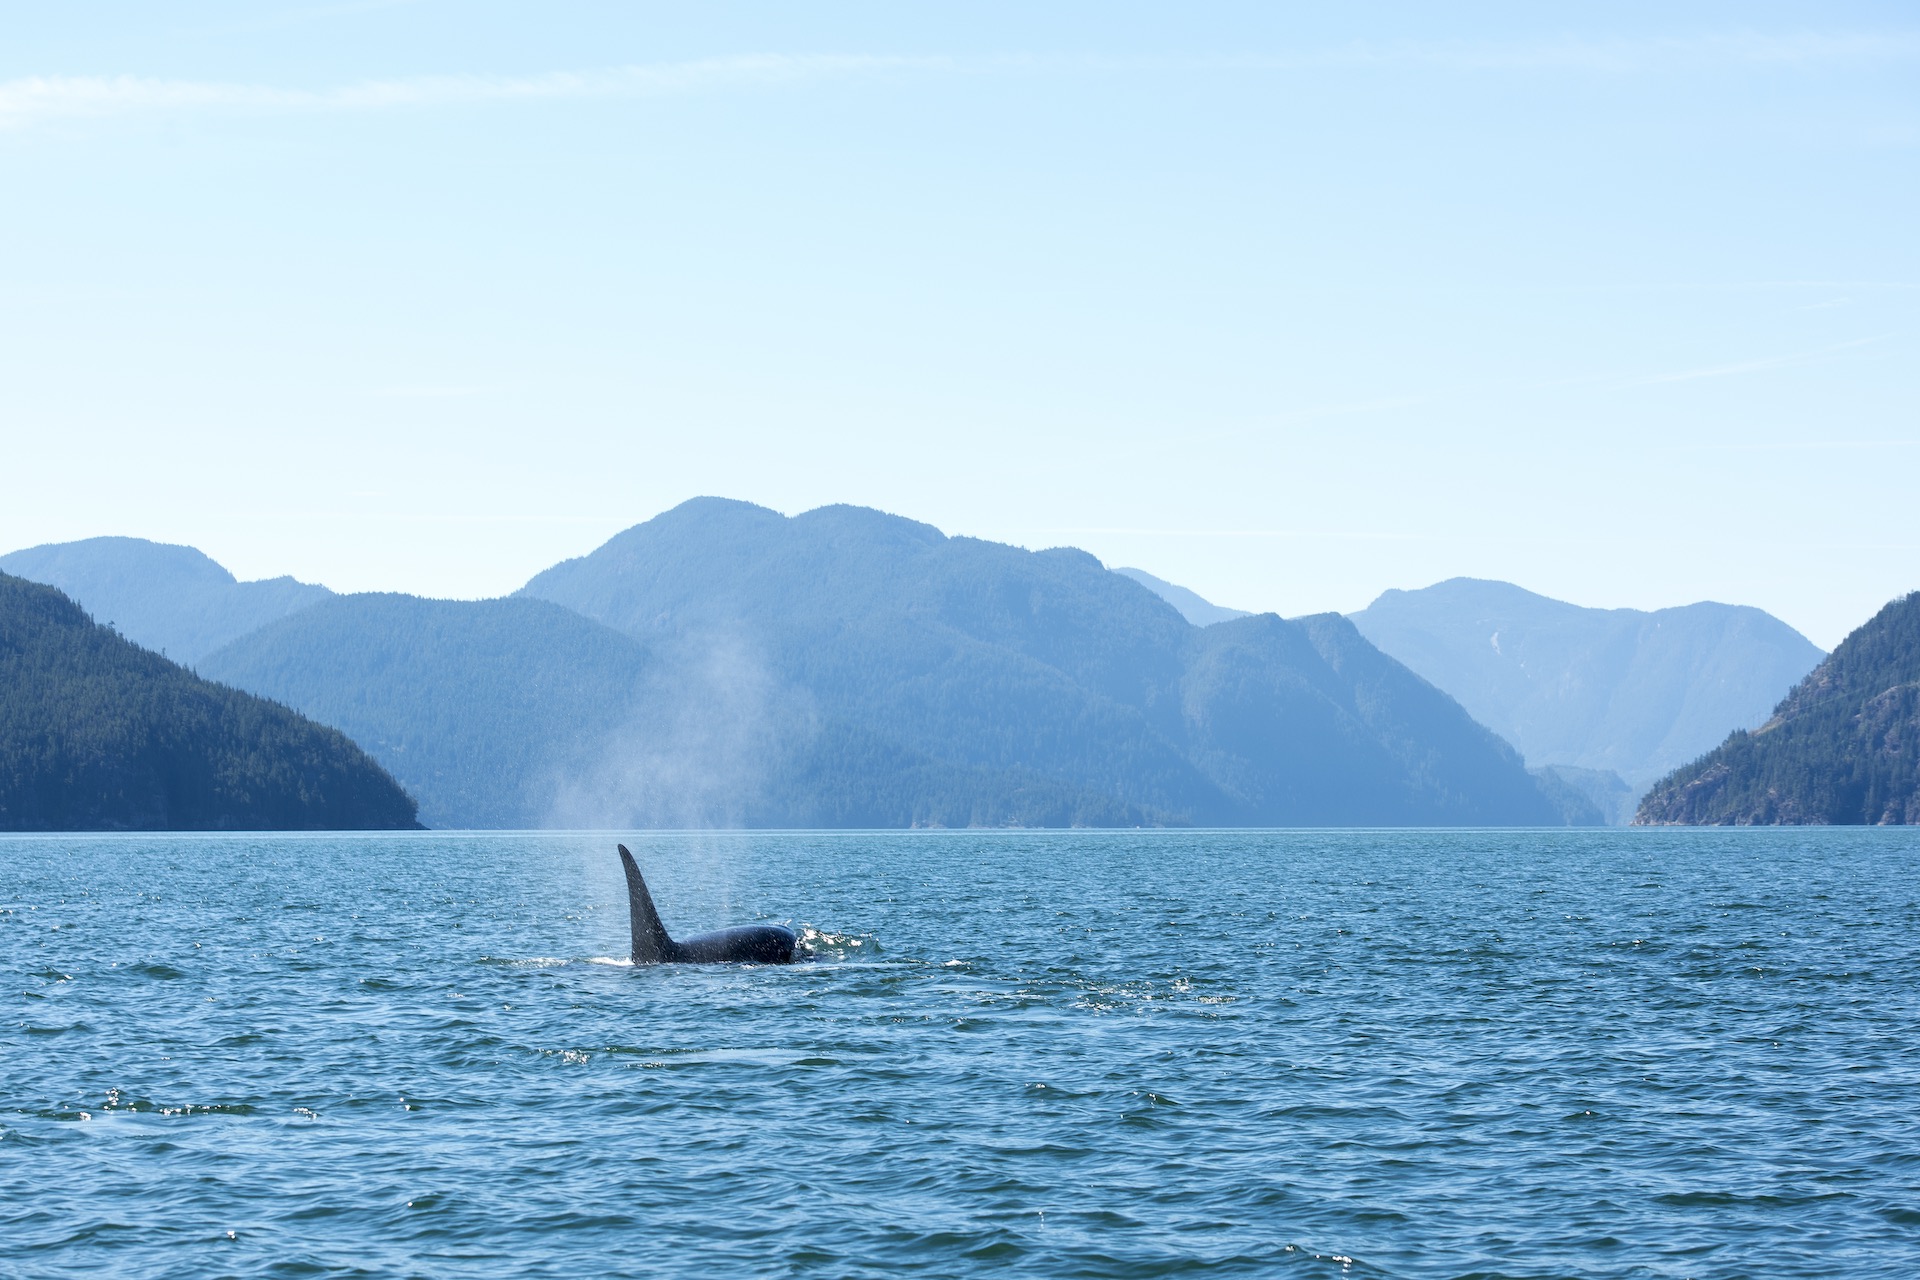 photo of a whale breaching in a bay surrounded by blue mountains